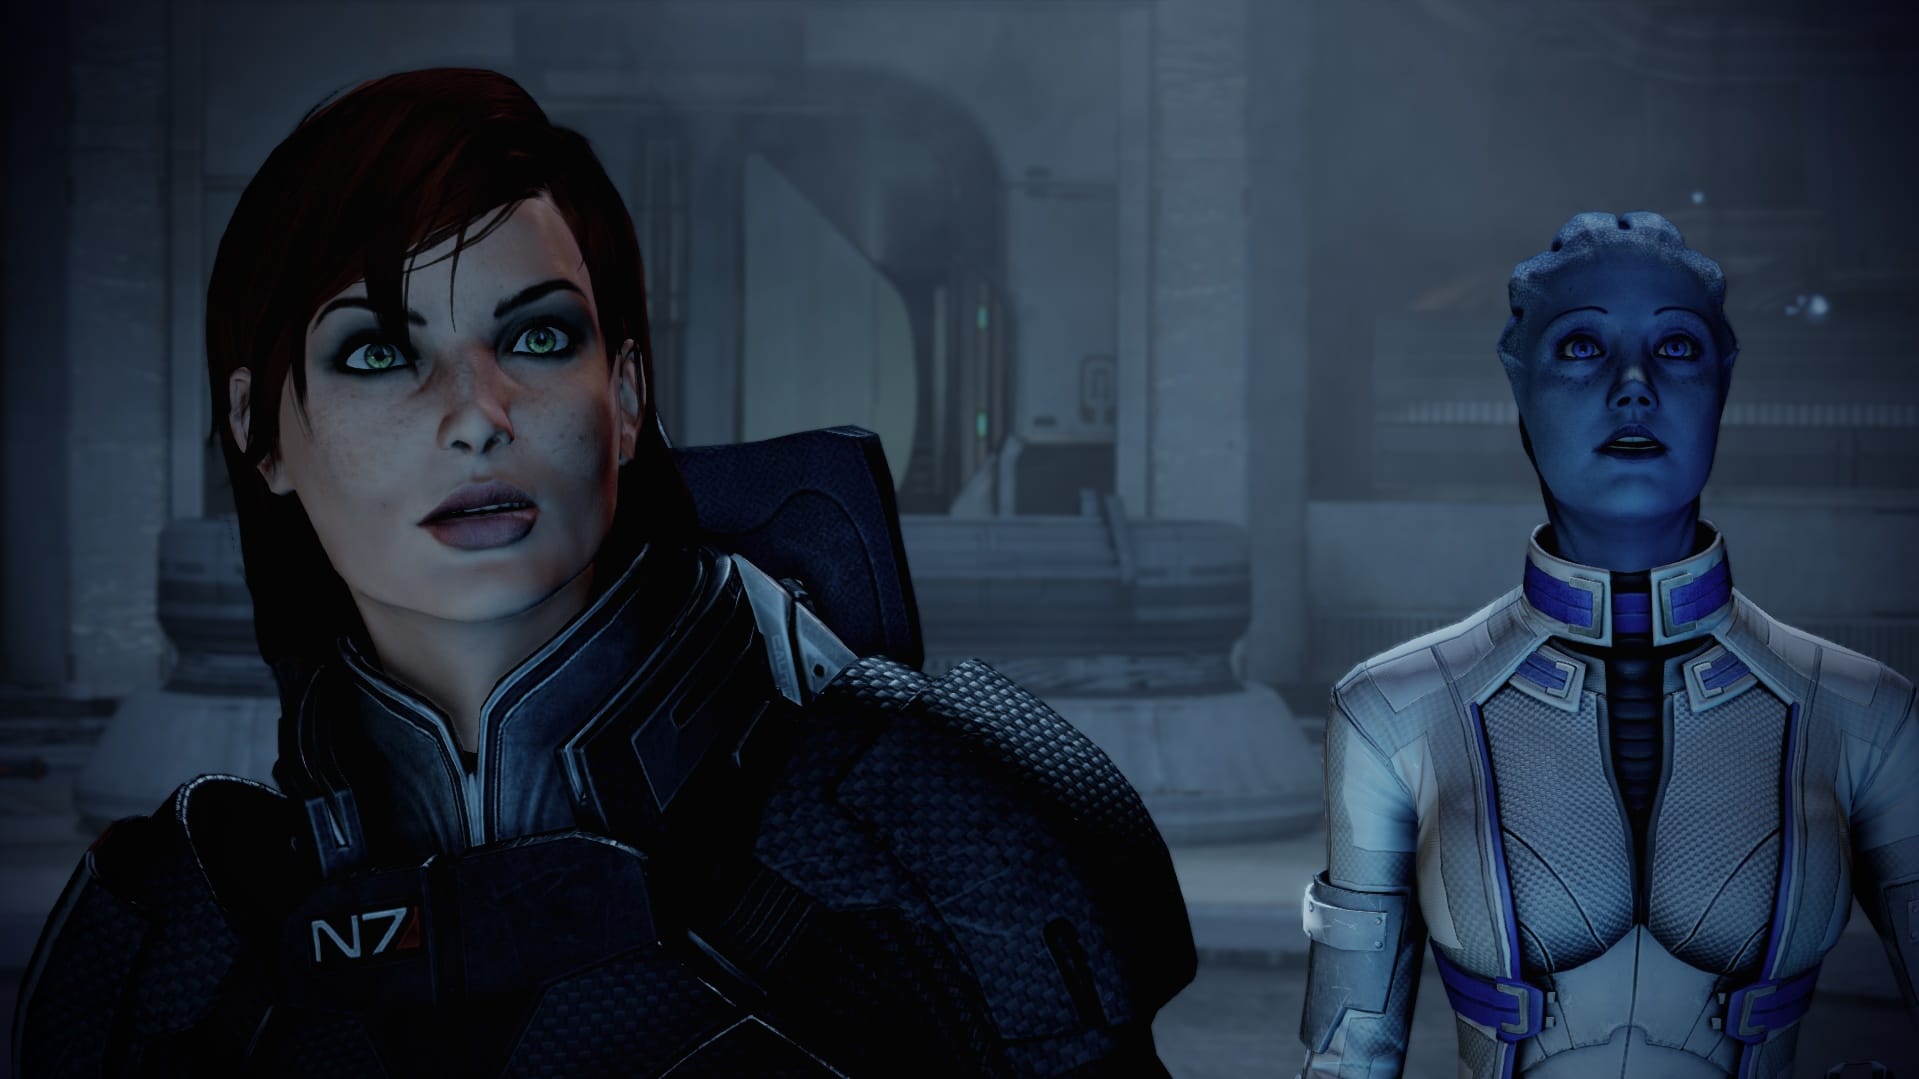 Facial expressions that speak volumes. Mass Effect 2 is always good for a surprise.